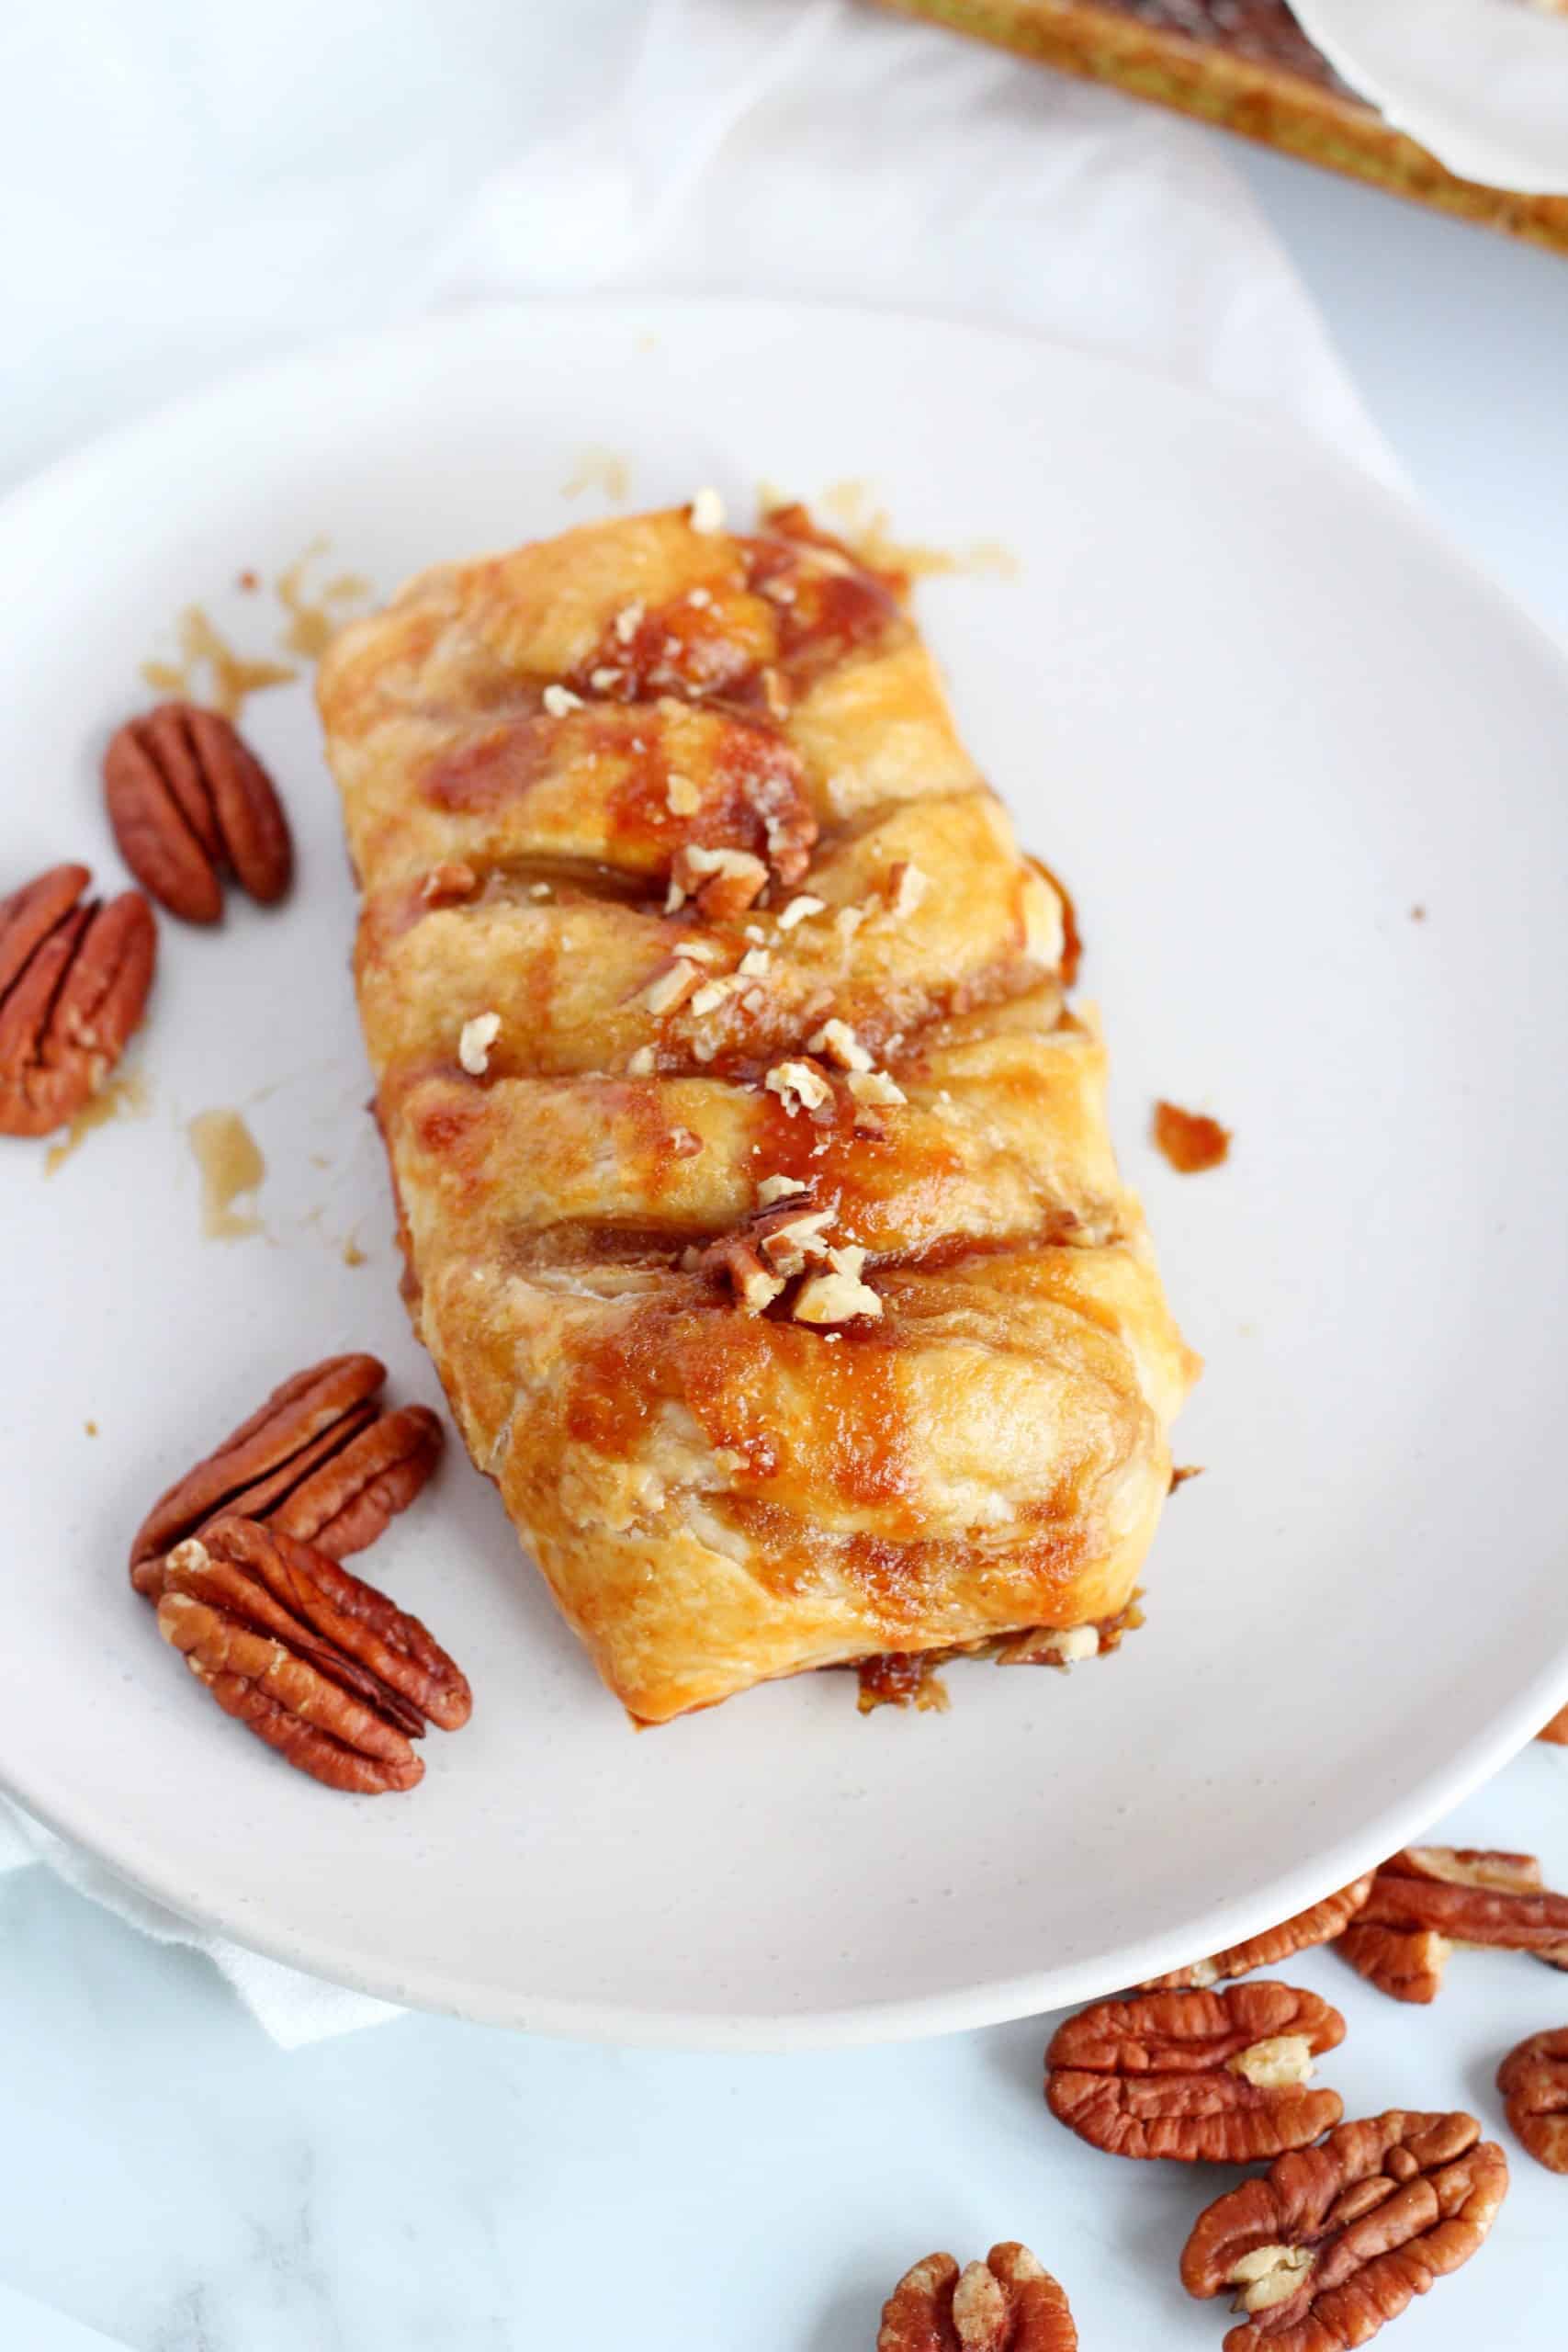 maple pecan pastry on plate